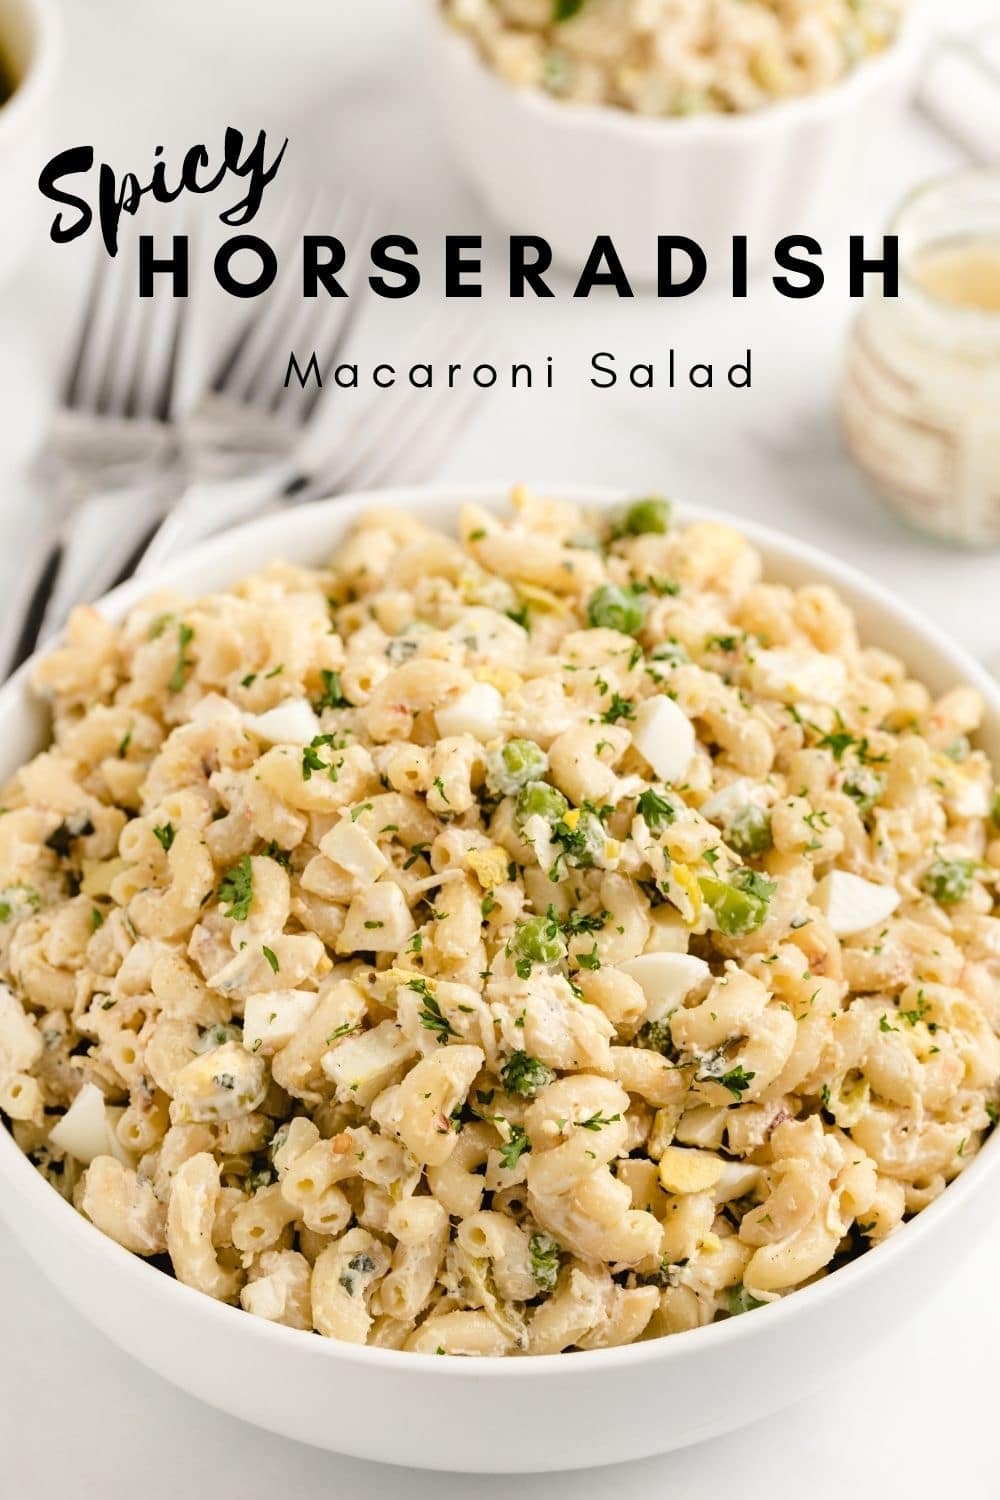 Spicy Horseradish Macaroni Salad easily becomes the star of party with its layers of flavor -think creamy noodles, a punchy-pickled veggie addition and fresh herbs. Macaroni salad is the perfect side dish for every gathering from grilling to potluck celebrations and effortlessly add pizzazz to weeknight dinners.  via @cmpollak1